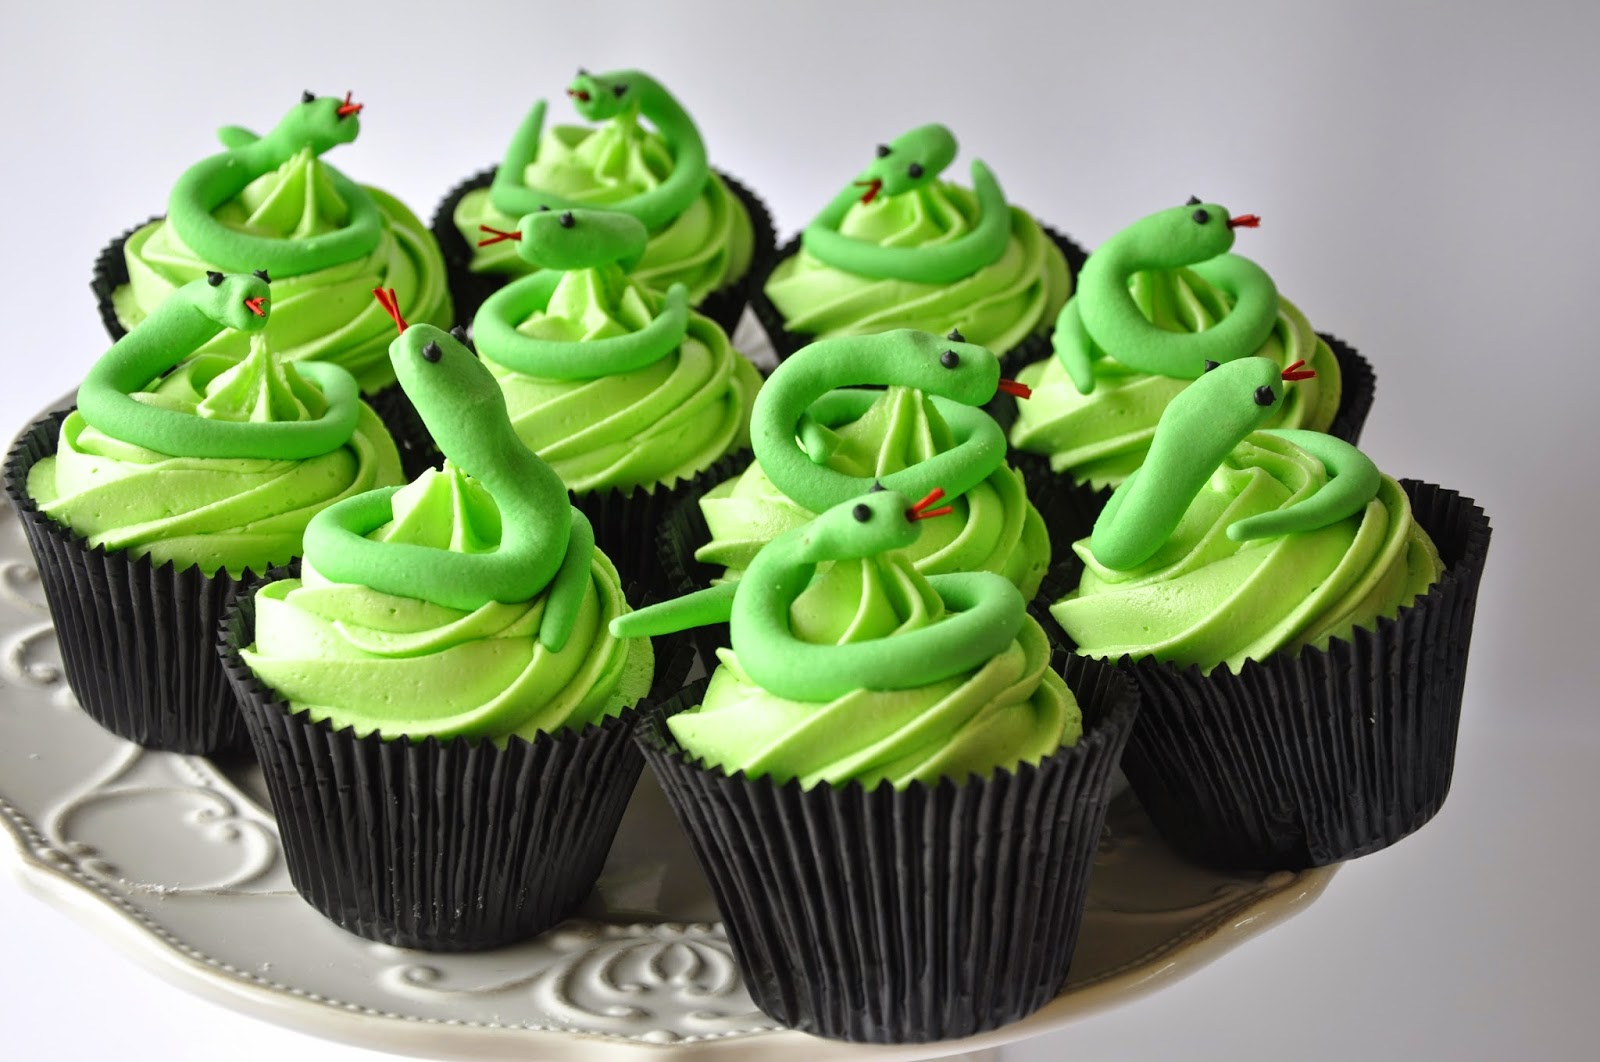 snake cupcakes designs rozannes cakes green snake cupcakes durbanville. 